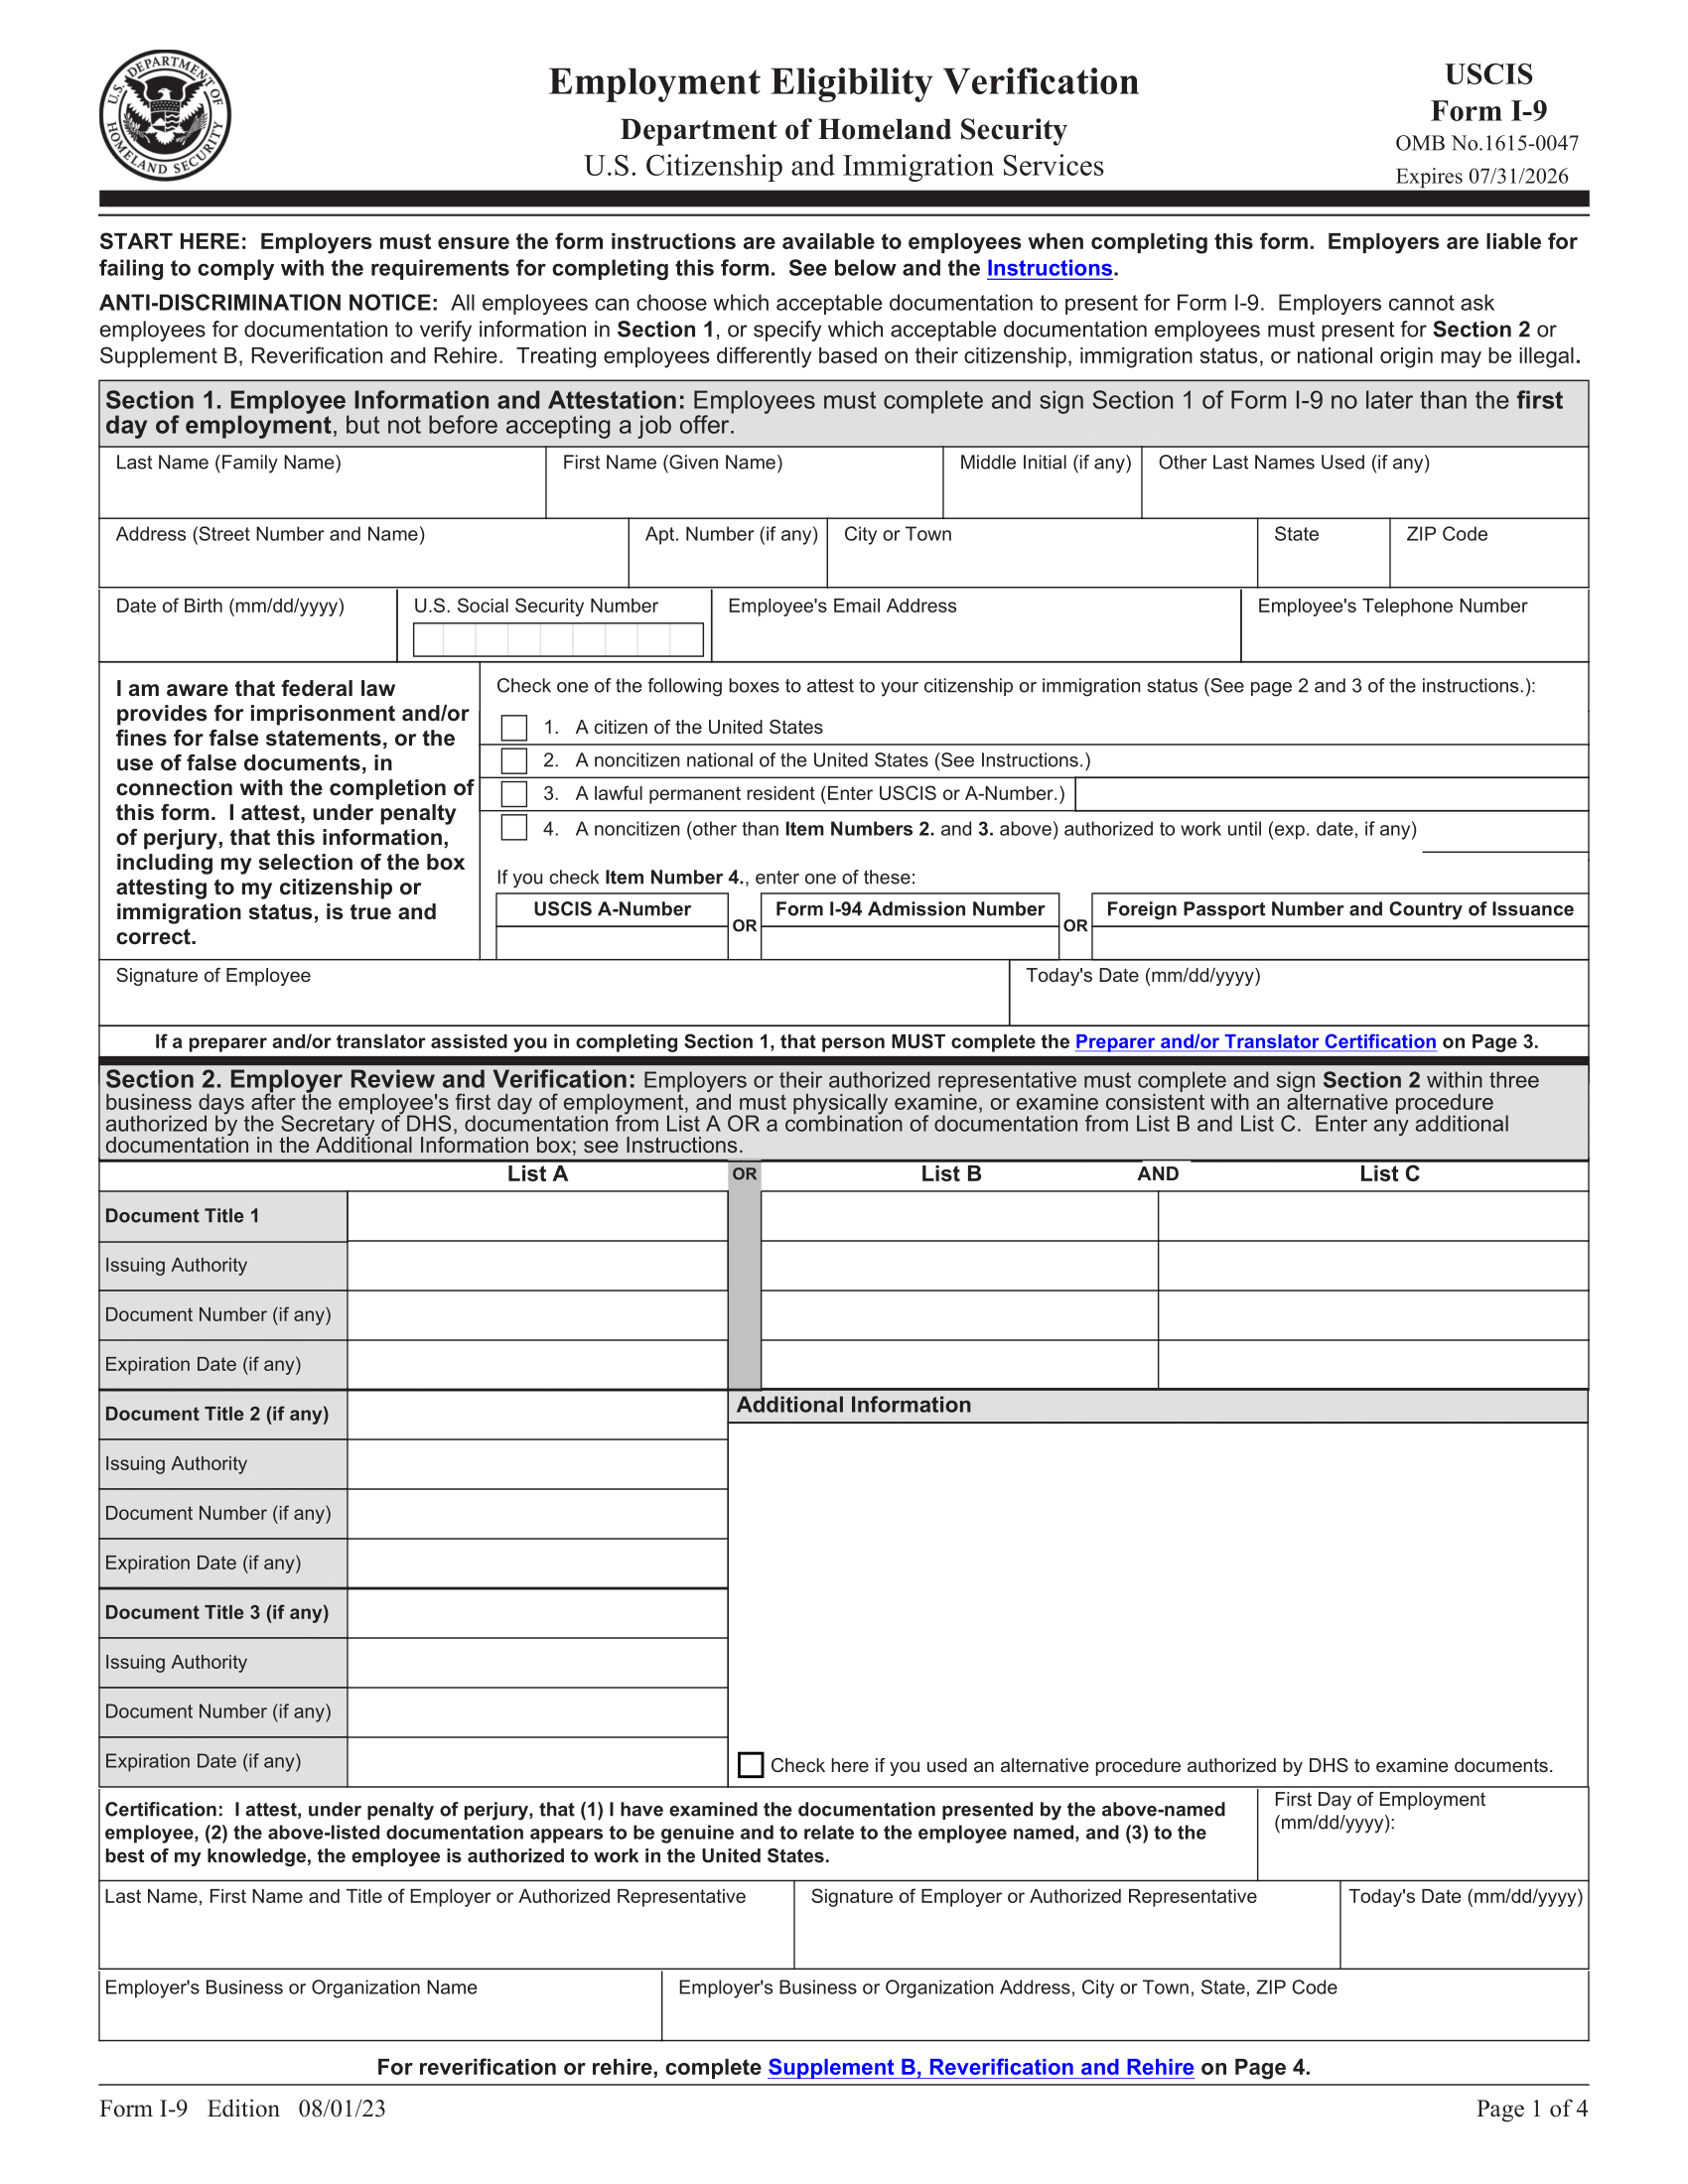 Form I-9 template